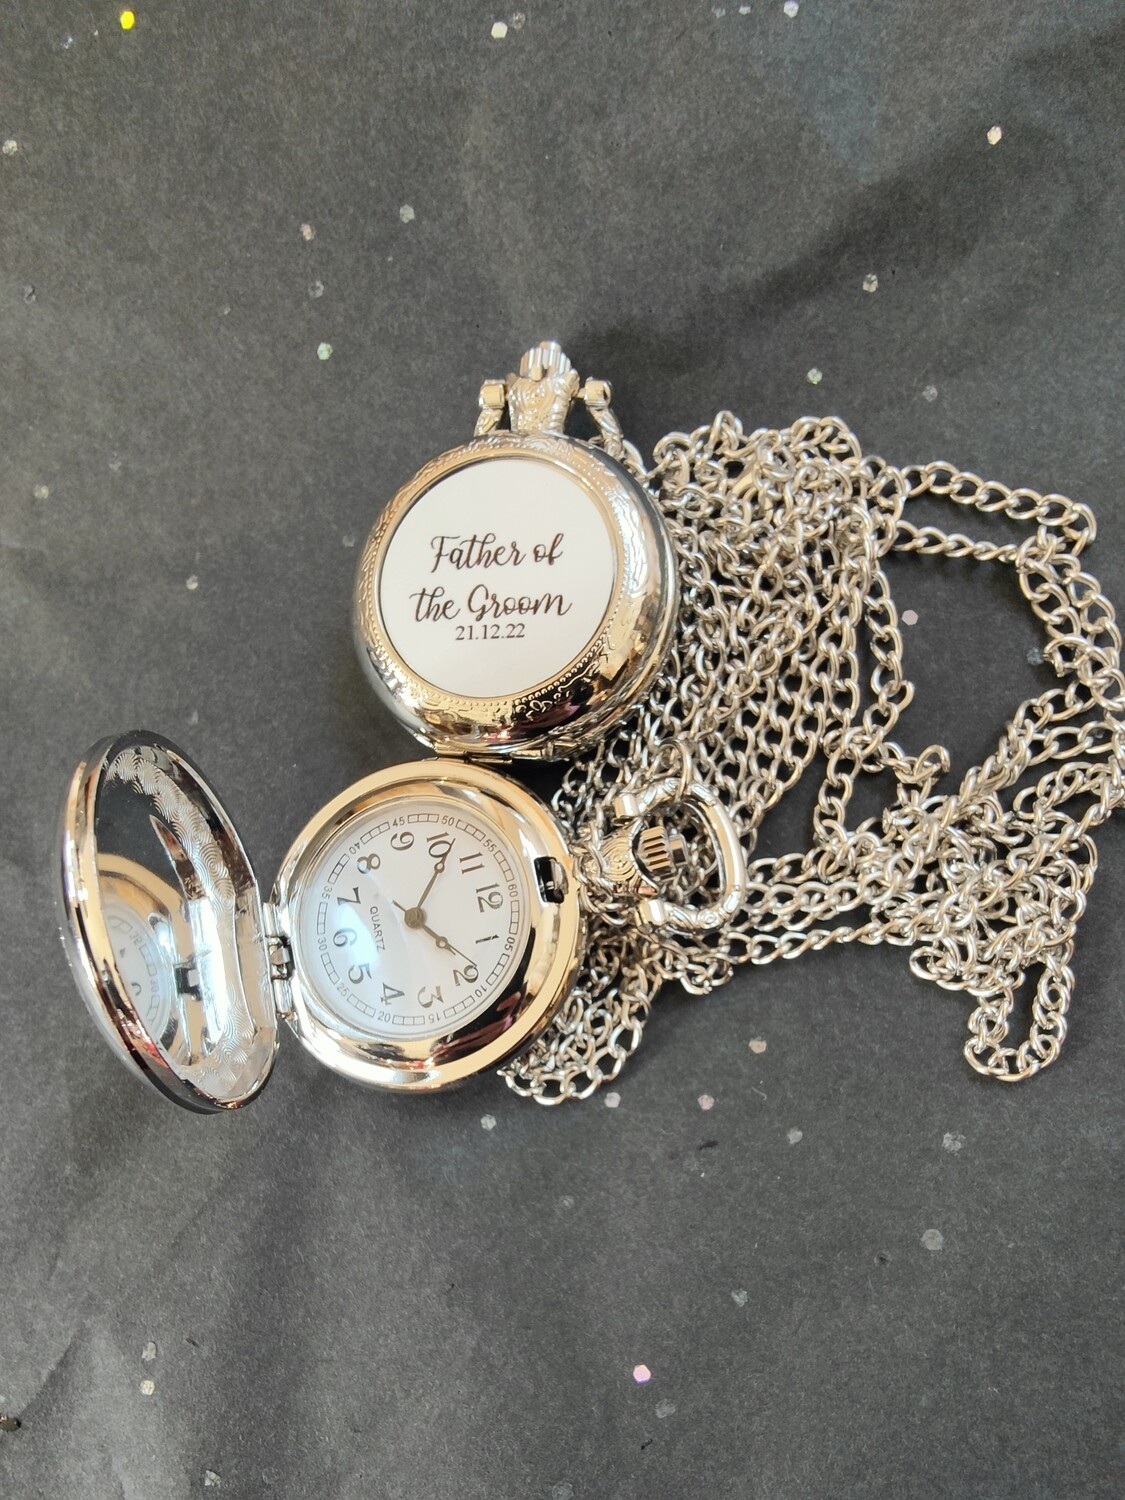 Personalized Father of the Groom Pocket Watch